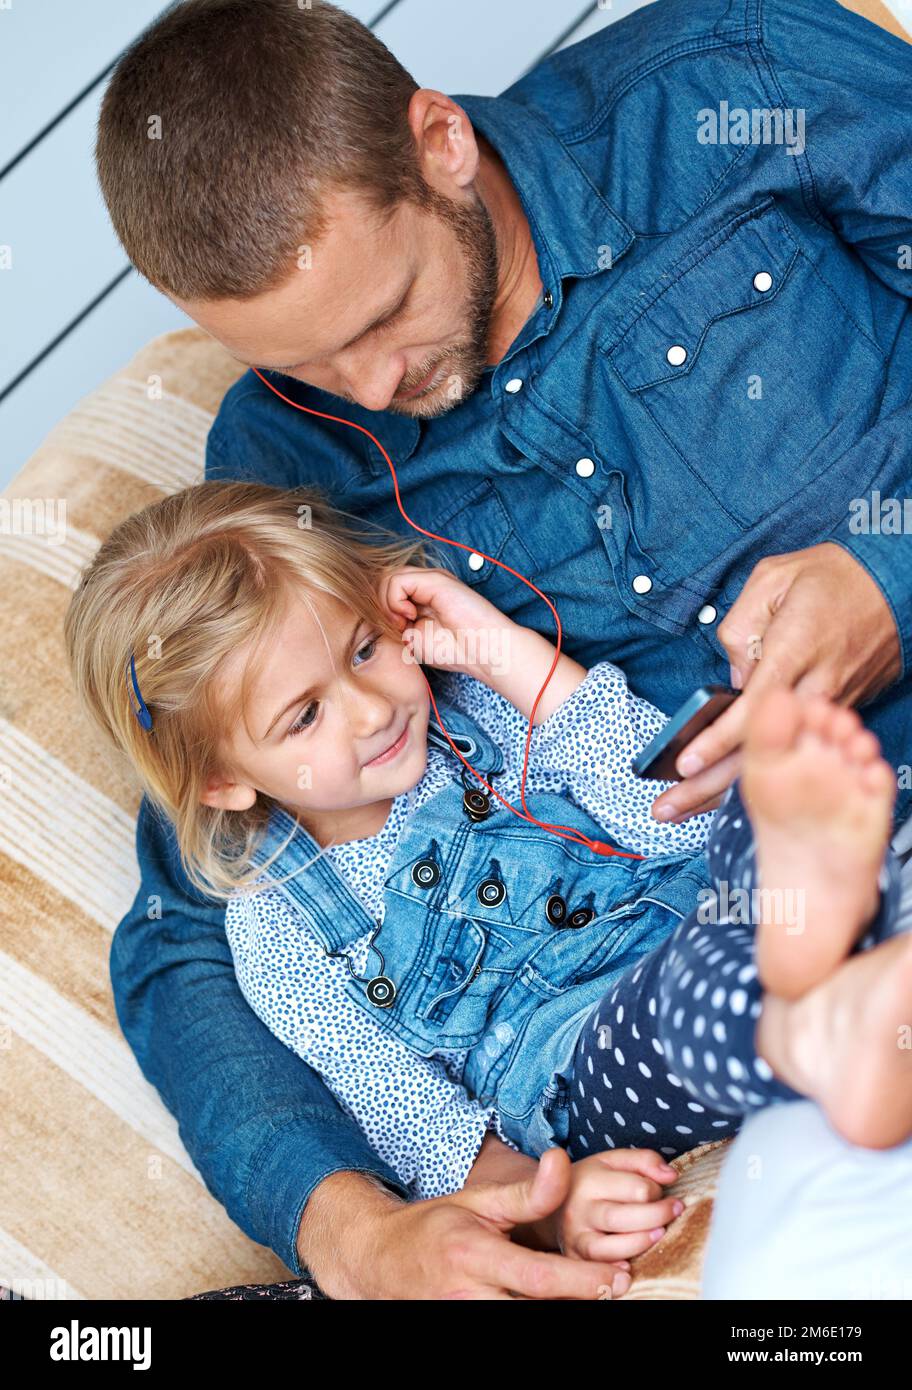 Choosing their next track. an adorable little girl sitting on the sofa sharing headphones with her father. Stock Photo